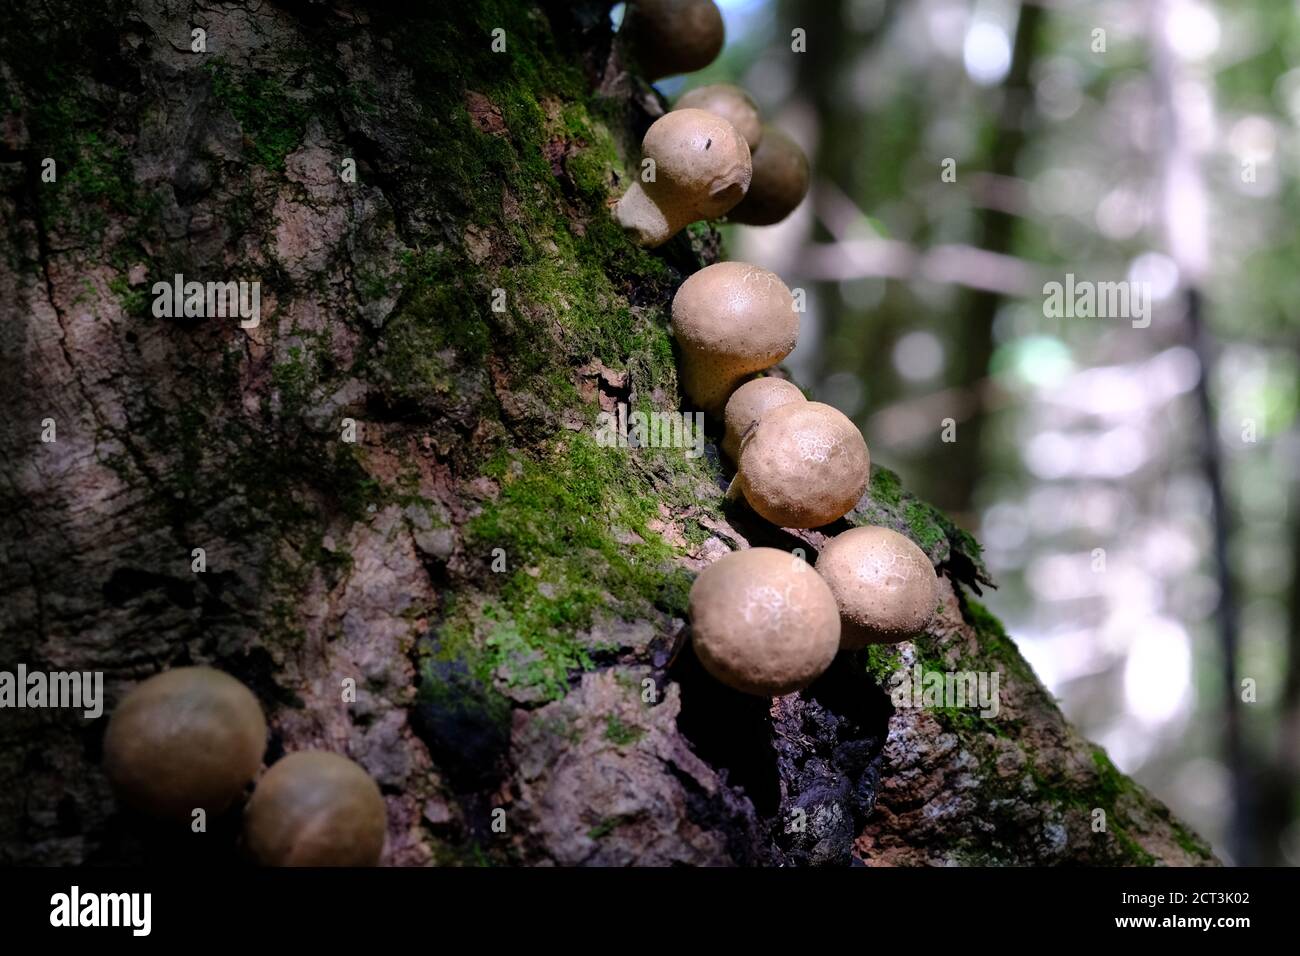 Pale brown golf ball sized puffballs growing on a mossy tree trunk in a Quebec forest, Val-des-Monts, Canada. Also dimpled like a golf ball. Stock Photo